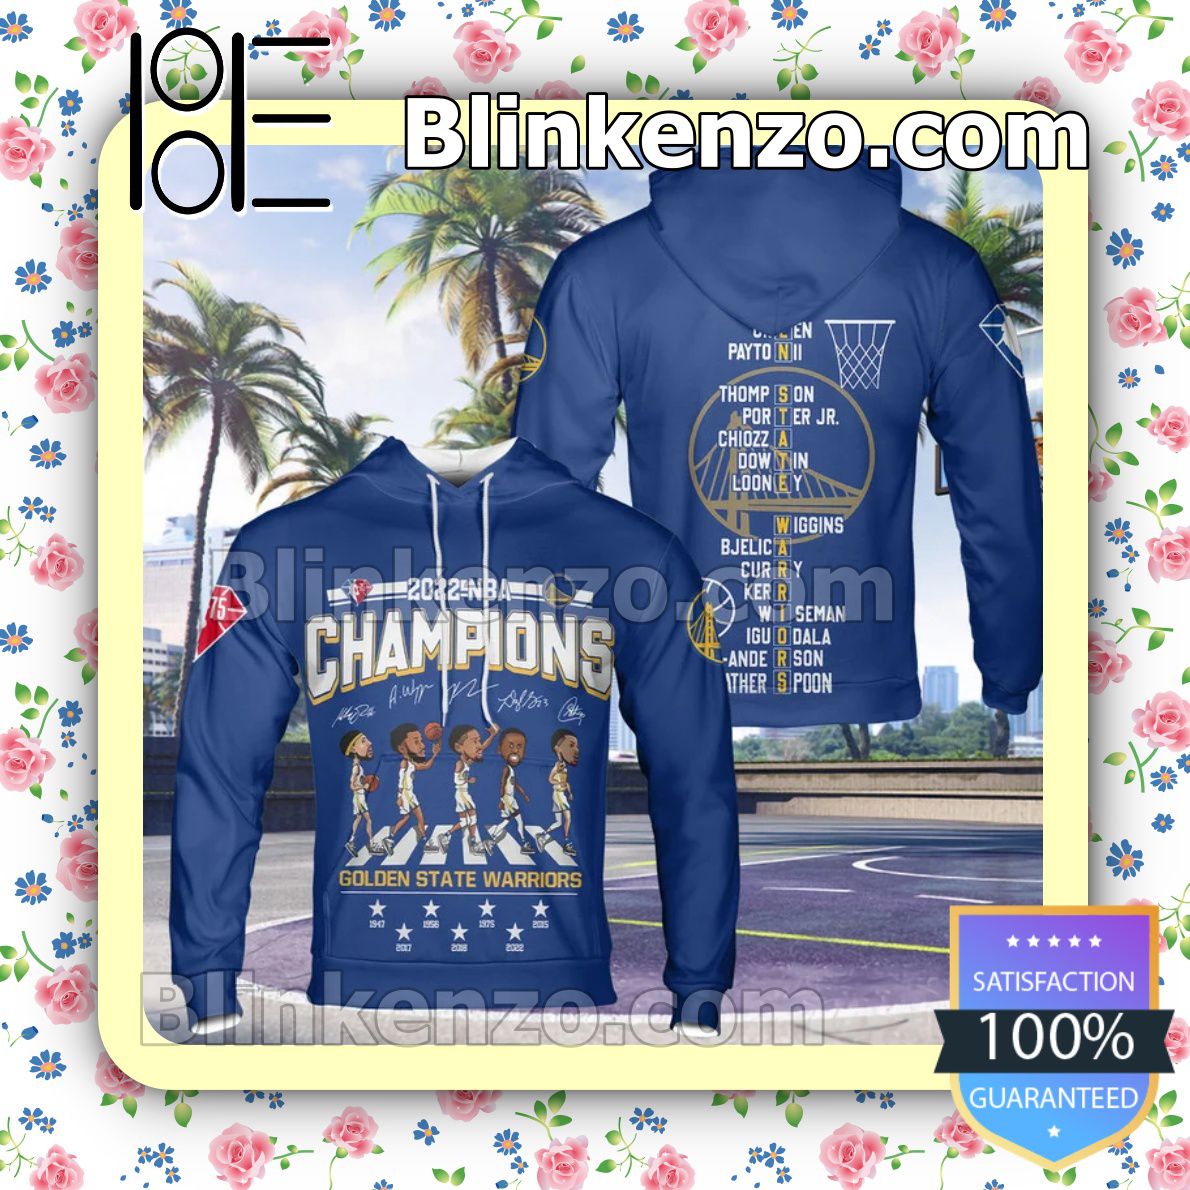 Vibrant 2022 Nba Champions Golden State Warriors Abbey Road Signatures Hoodies, Long Sleeve Shirt